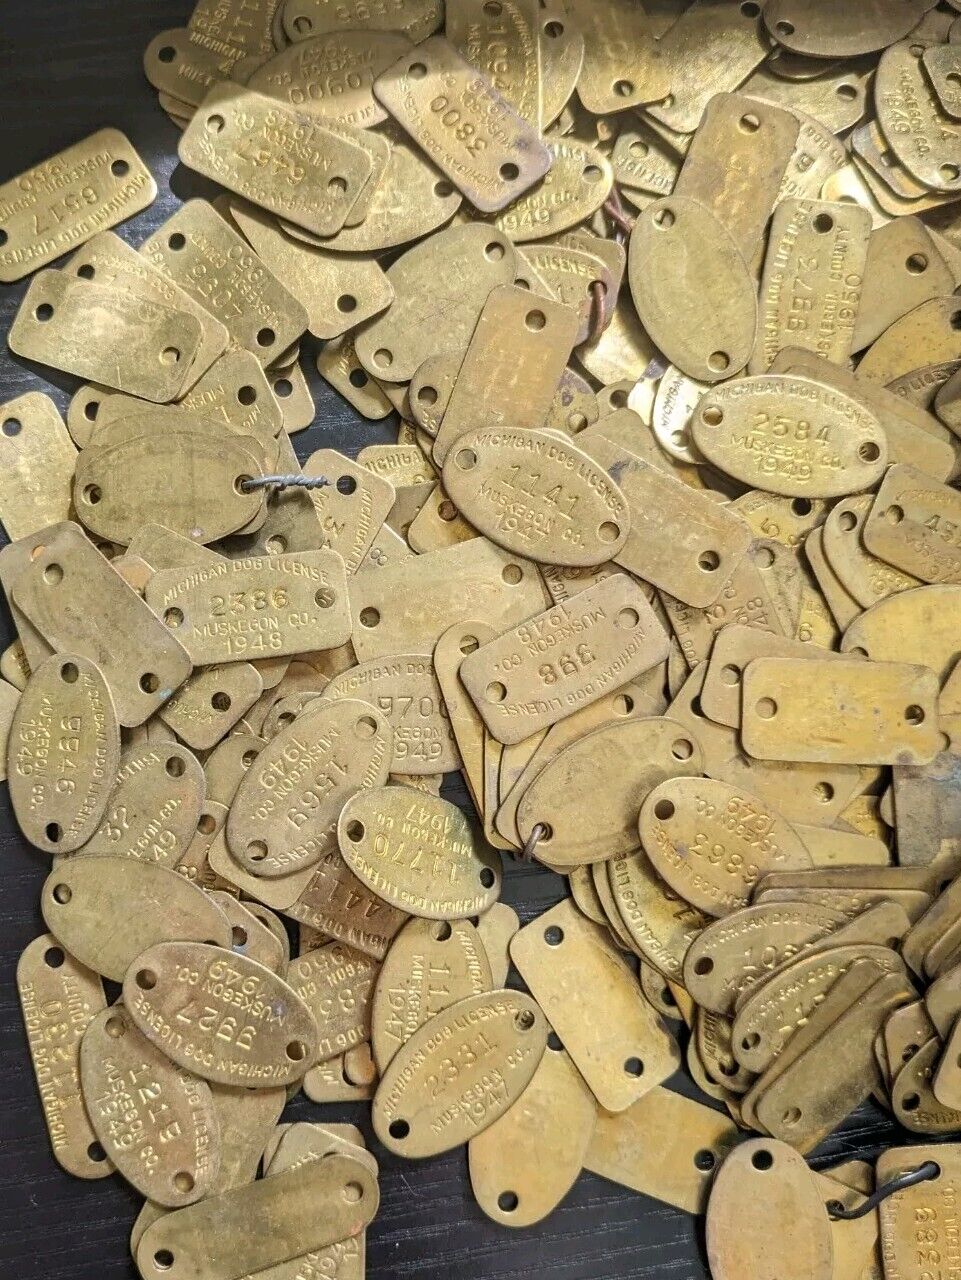 1948 To 51 Muskegon COUNTY MICHIGAN DOG LICENSE TAG Lot Of 200 Brass Tags Metal 